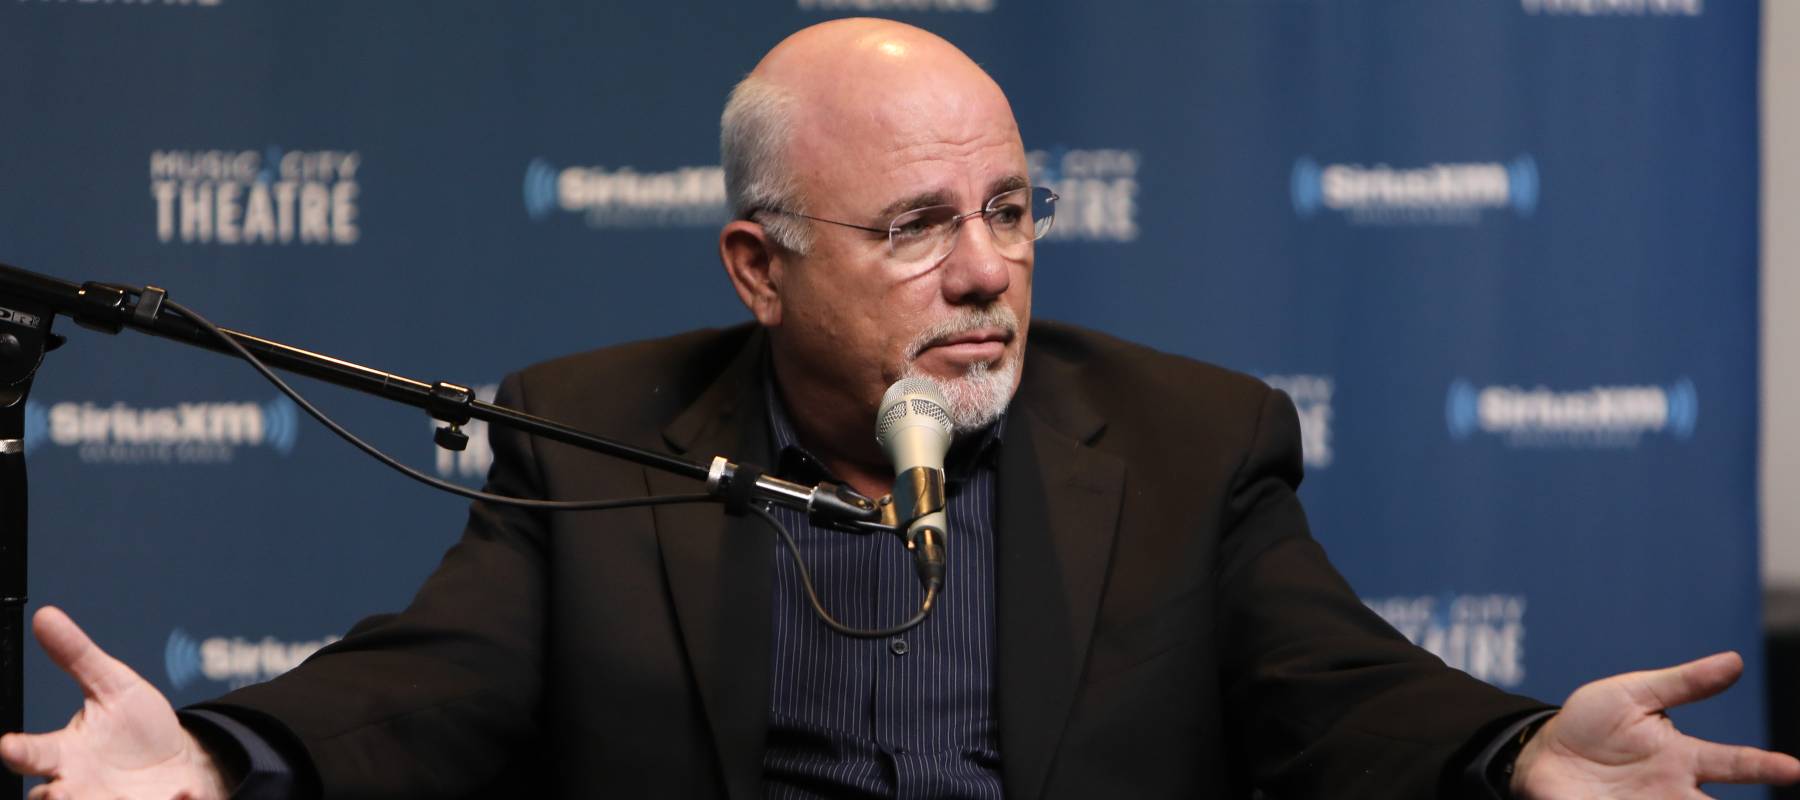 Money Expert Dave Ramsey Celebrates 25 Years On The Radio During A SiriusXM Town Hall at Sirius XM Nashville studios on August 22, 2017 in Nashville, Tennessee.